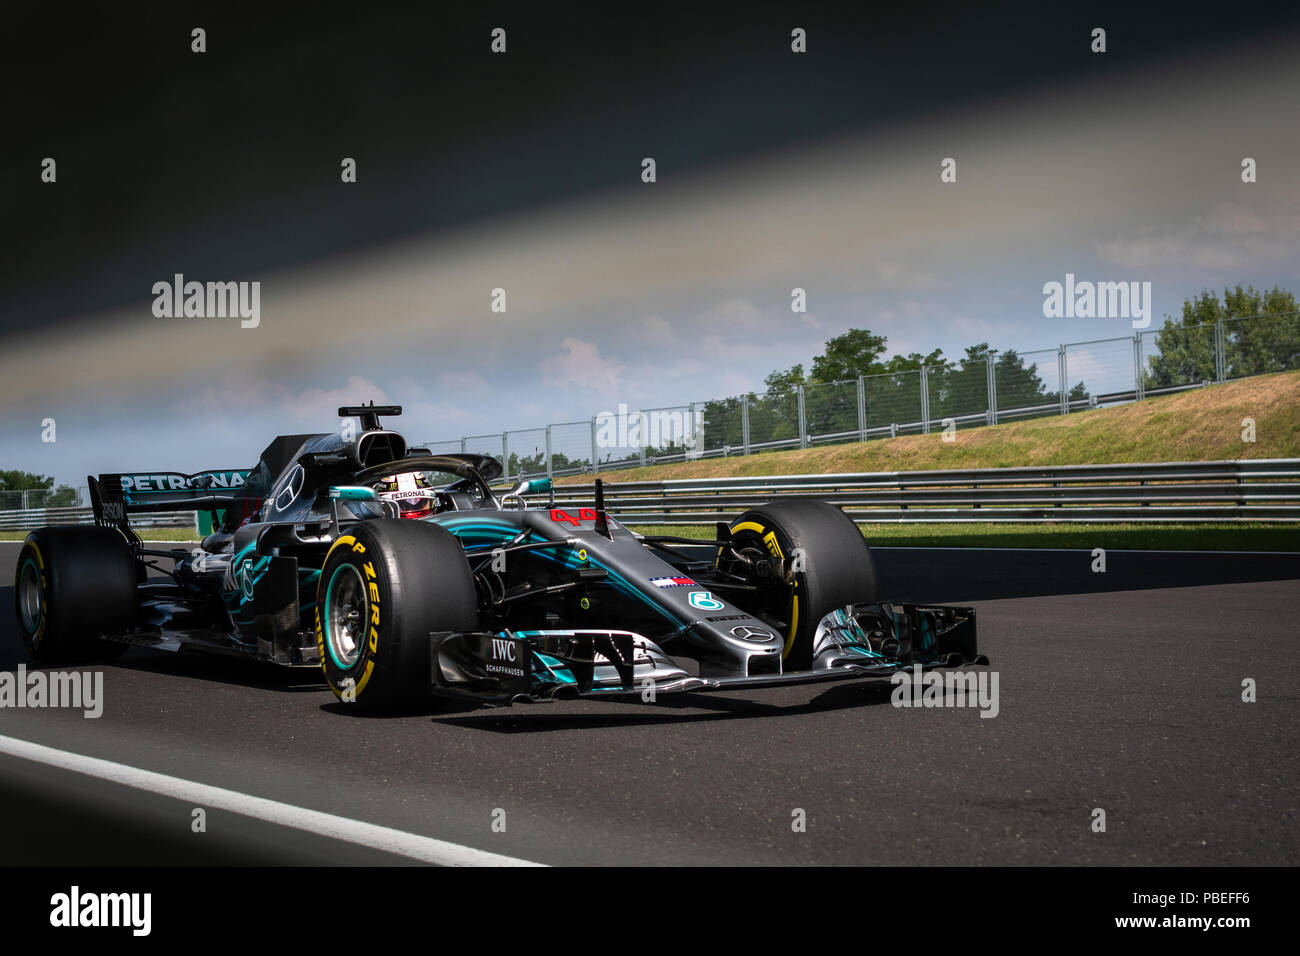 Mogyorod, Hungary.  27th July, 2018. Mercedes' British driver Lewis Hamilton steers his car during the first free practice of the Hungarian Formu1a one Grand Prix at Hungaroring in Mogyorod, Hungary on July 27, 2018. Credit: Jure Makovec/Xinhua/Alamy Live News Stock Photo